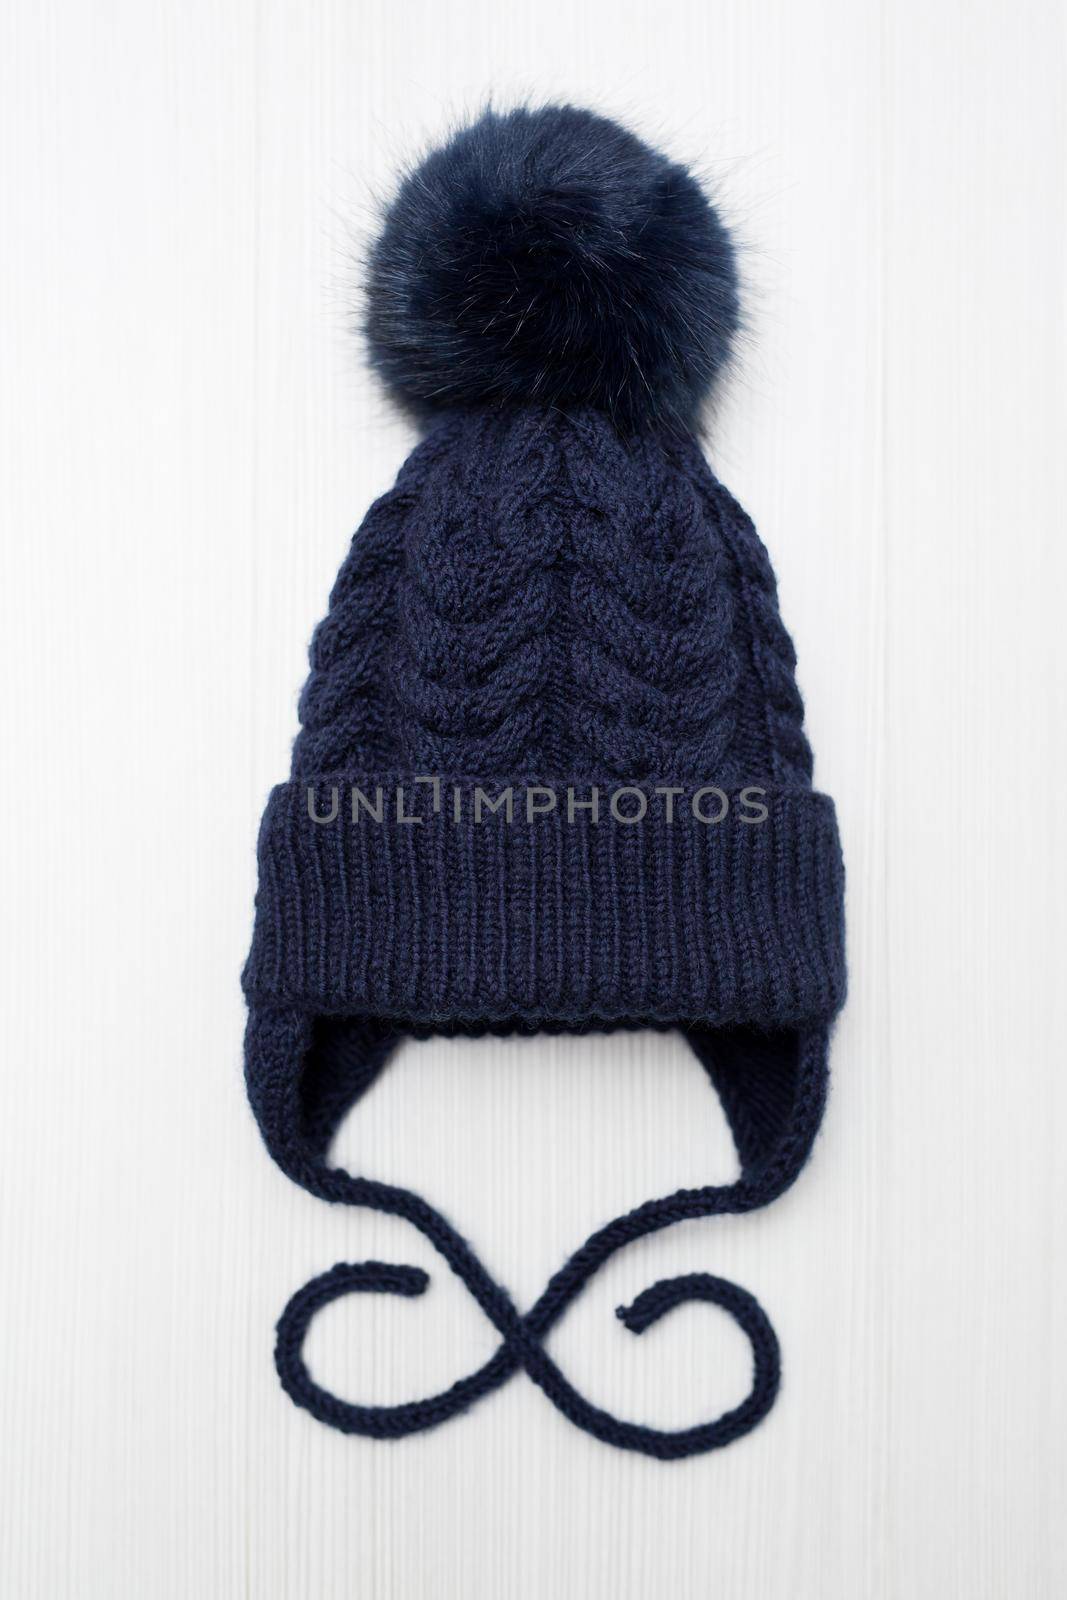 Children's knitted wool hat with a pompom, on a white background. by StudioPeace